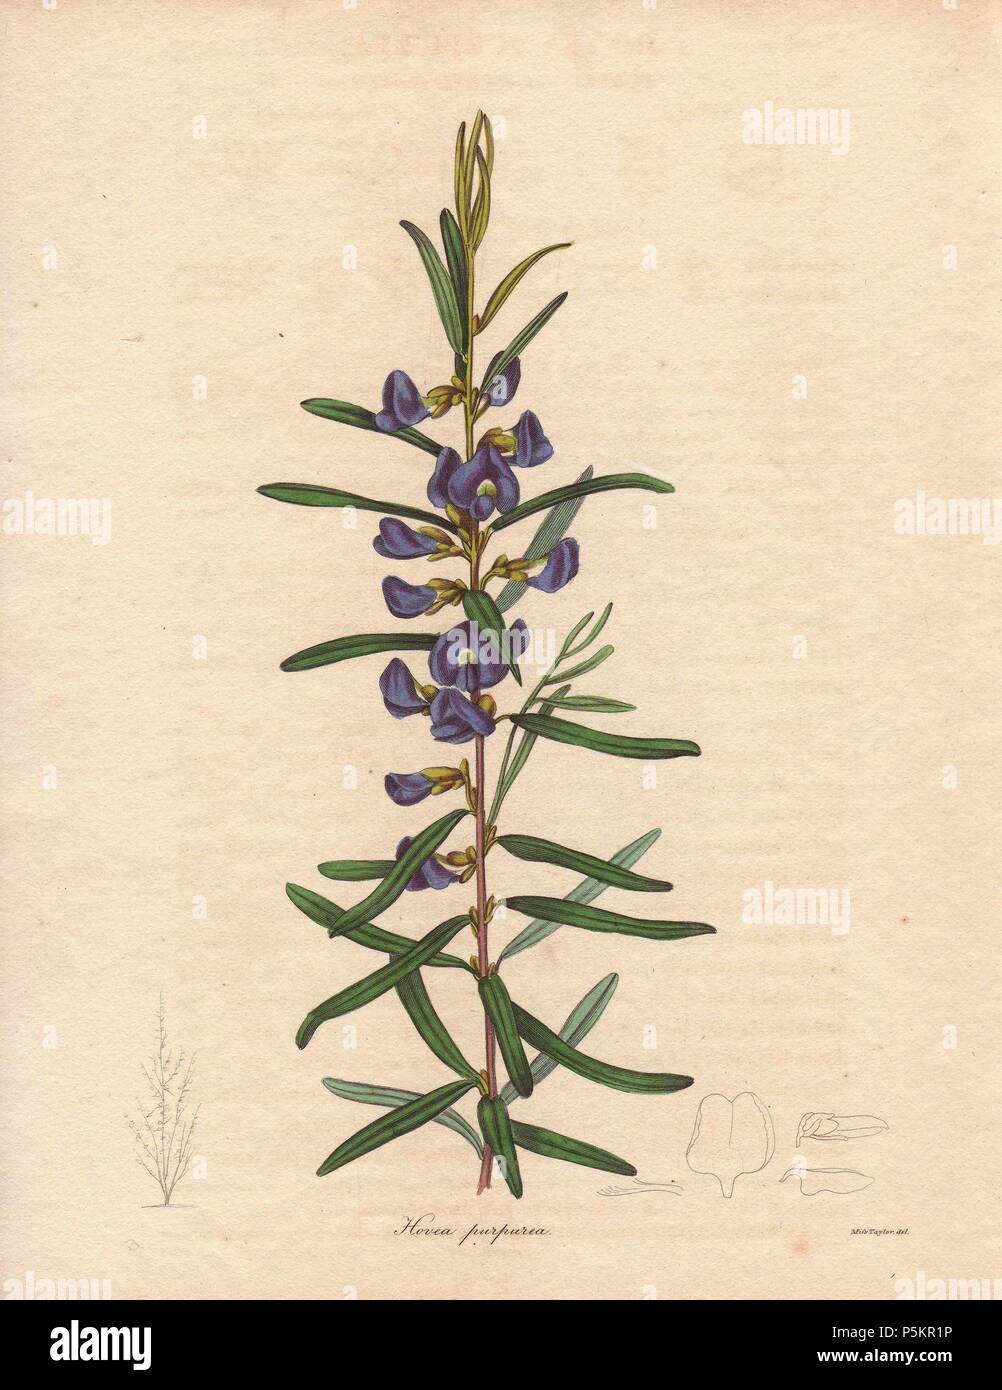 Hovea purpurea. . Purple hovea . . Miss Jane Taylor (active 18361842) was a painter of still lives and contributor of flower drawings to the Society of British Artists in London.. . Benjamin Maund's The Botanist was a five-volume series that introduced 250 new plants from 1836 to 1842. The series is notable for its many female artists: the plates were drawn by Maund's daughters Sarah and Eliza, Augusta Withers, Priscilla Bury, Jane Taylor, Miss R. Mills among others. The other characteristic is partial colouring - many of the finely detailed copperplate engravings are left with part of the fl Stock Photo